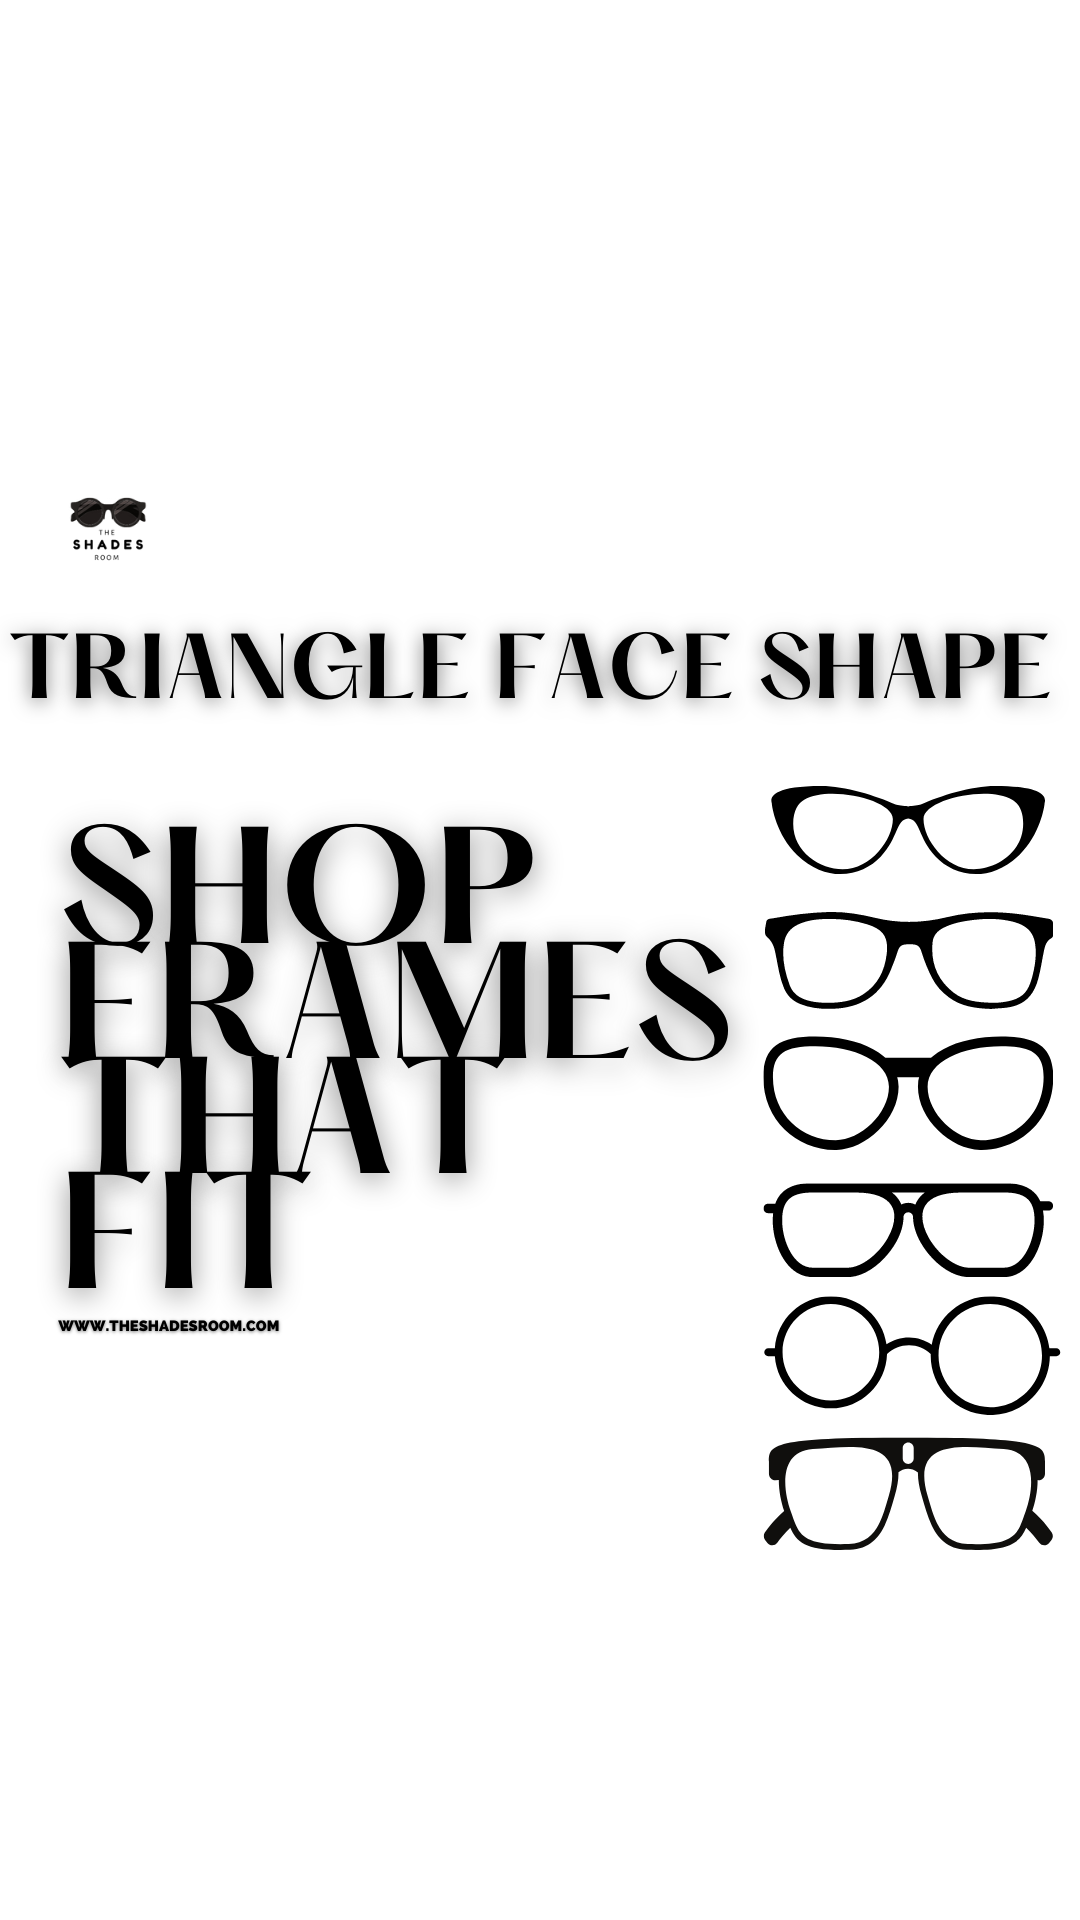 People With A Triangular Face Often Have A Wider Forhead A Narrow Chin & Angular Cheeks.  Frames With Square & Round Accents Are Best Suited For our Face.